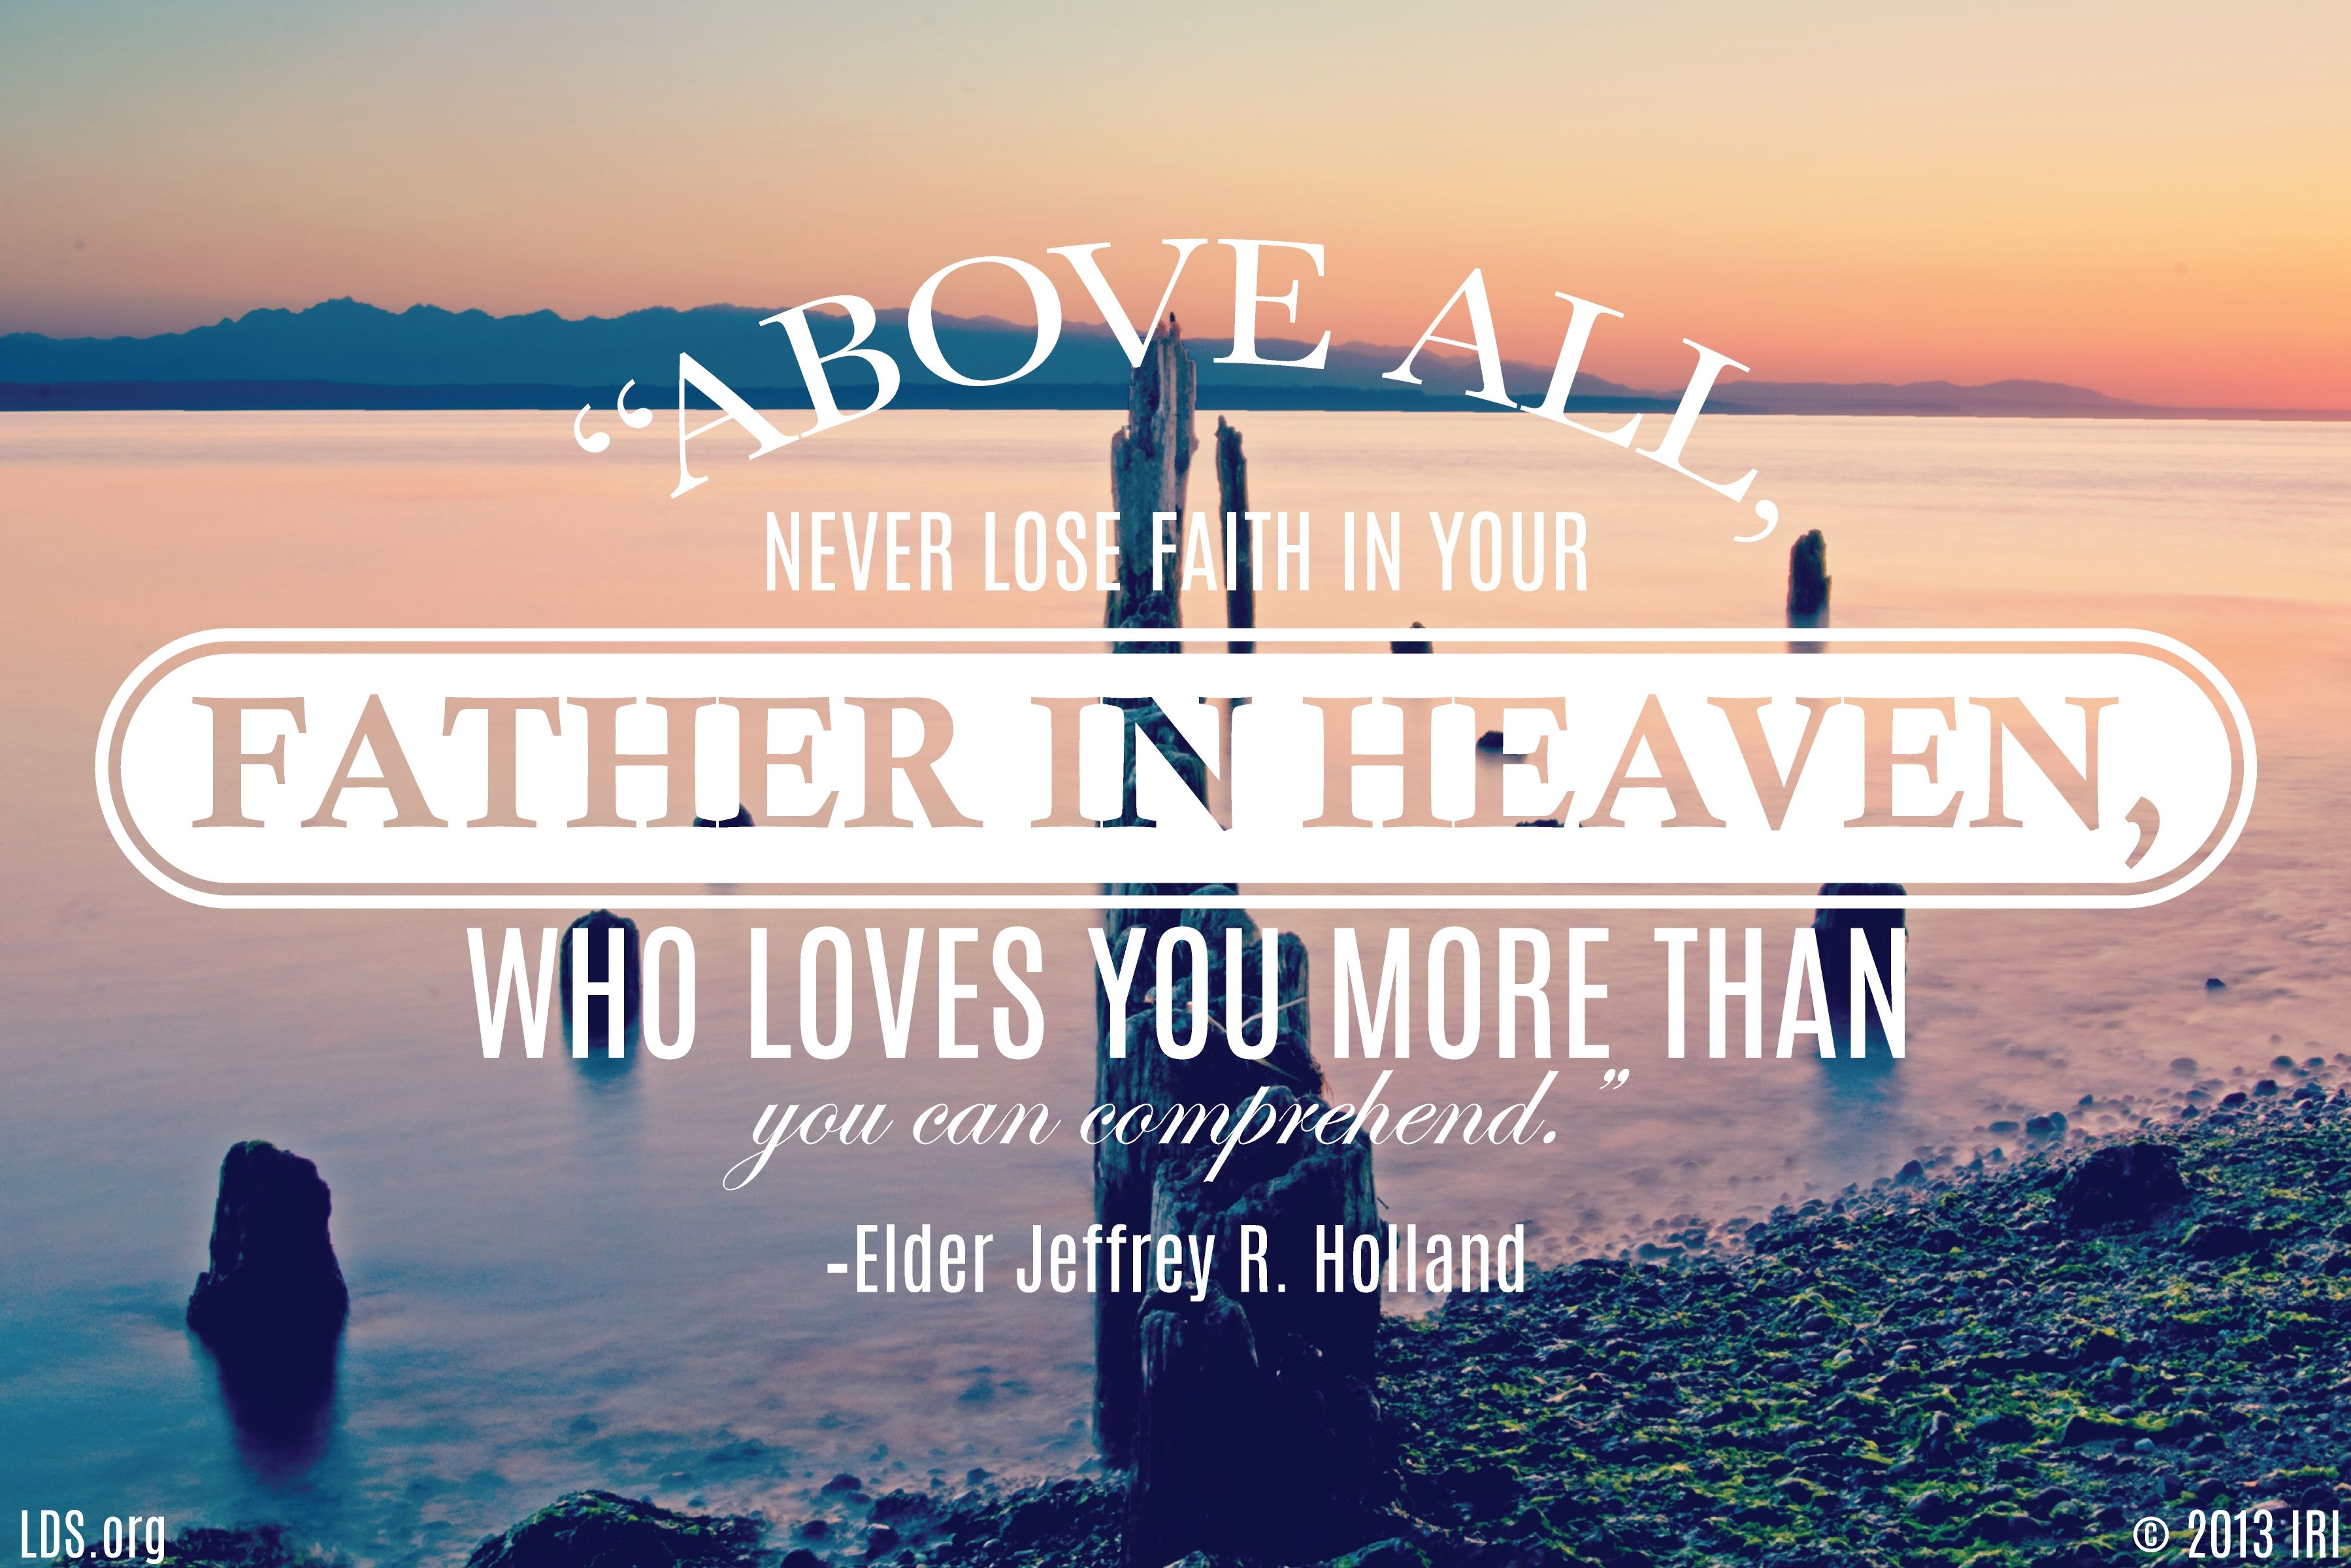 “Above all, never lose faith in your Father in Heaven, who loves you more than you can comprehend.”—Elder Jeffrey R. Holland, “Like a Broken Vessel”